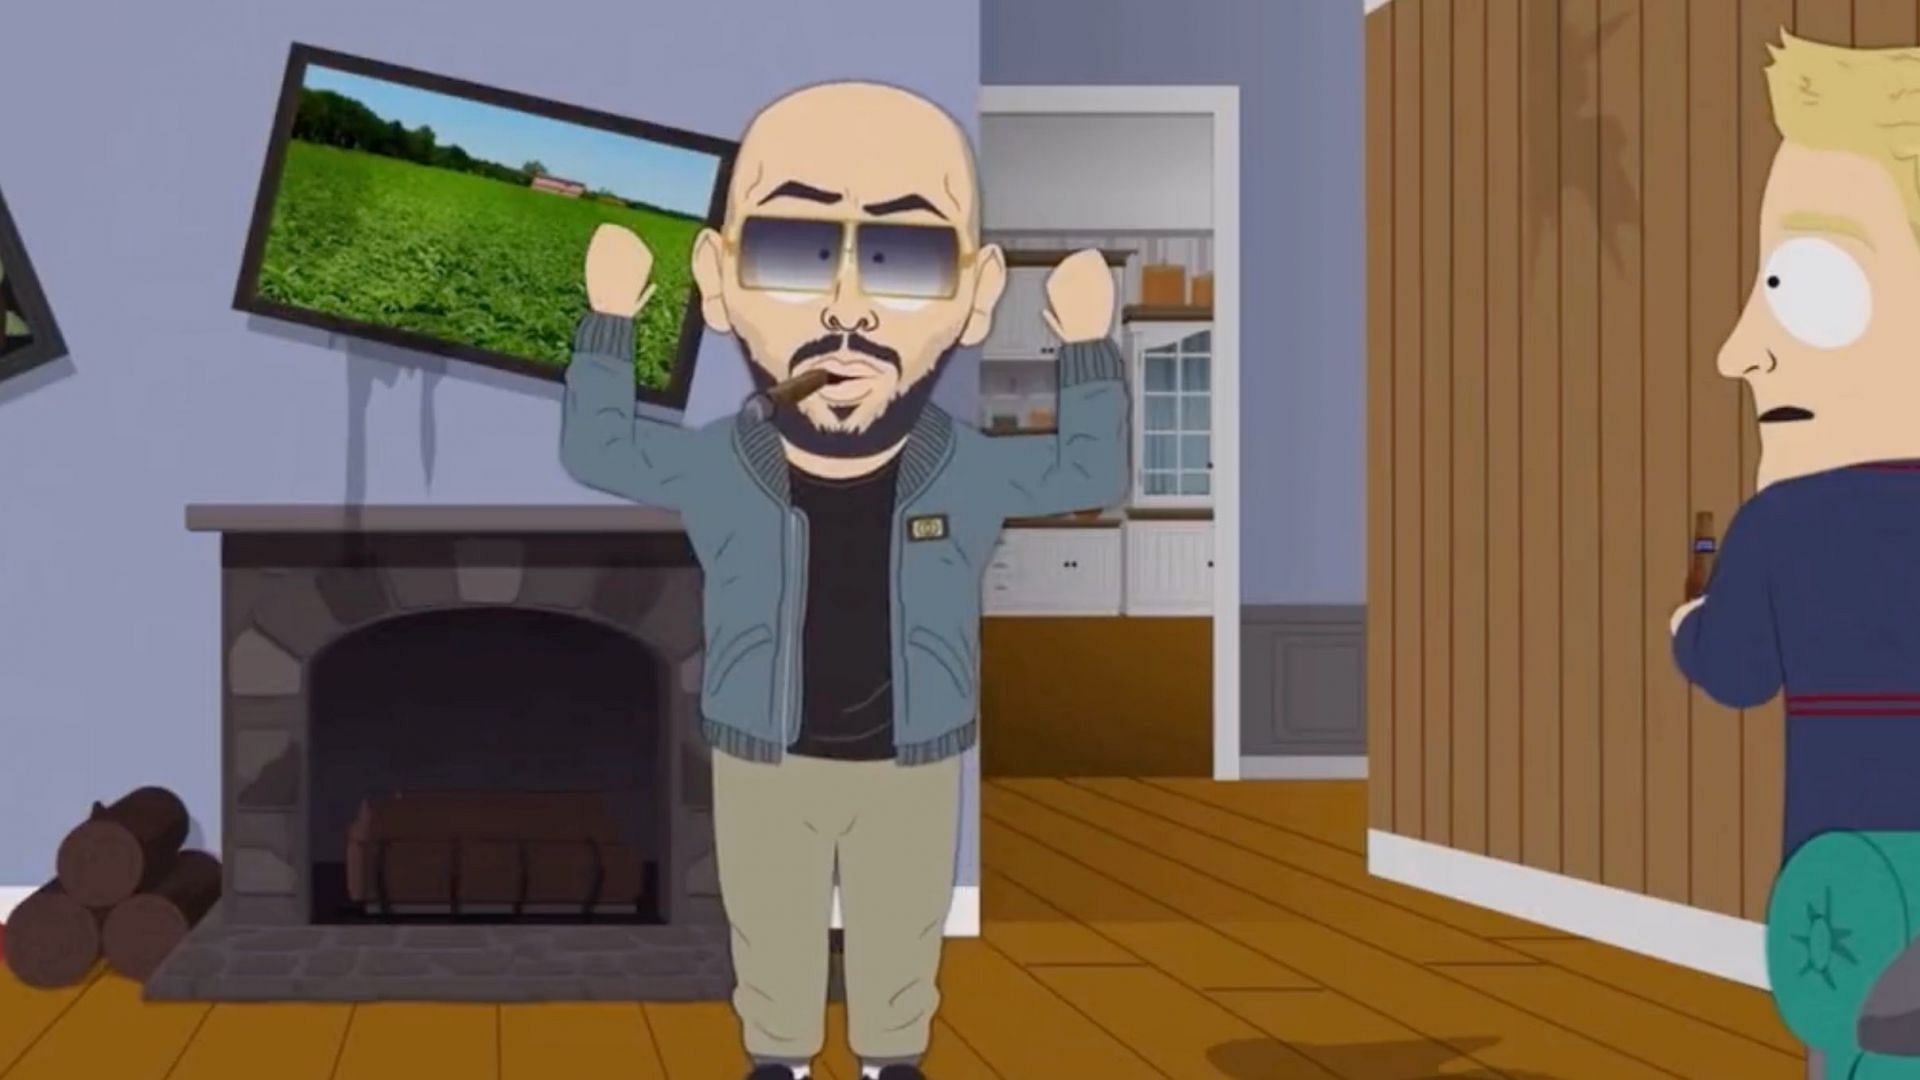 Social media users reacted to Andrew Tate in the recent episode of South Park: Reactions and more explored. (Image via SOUTH PARK / HBO MAX)